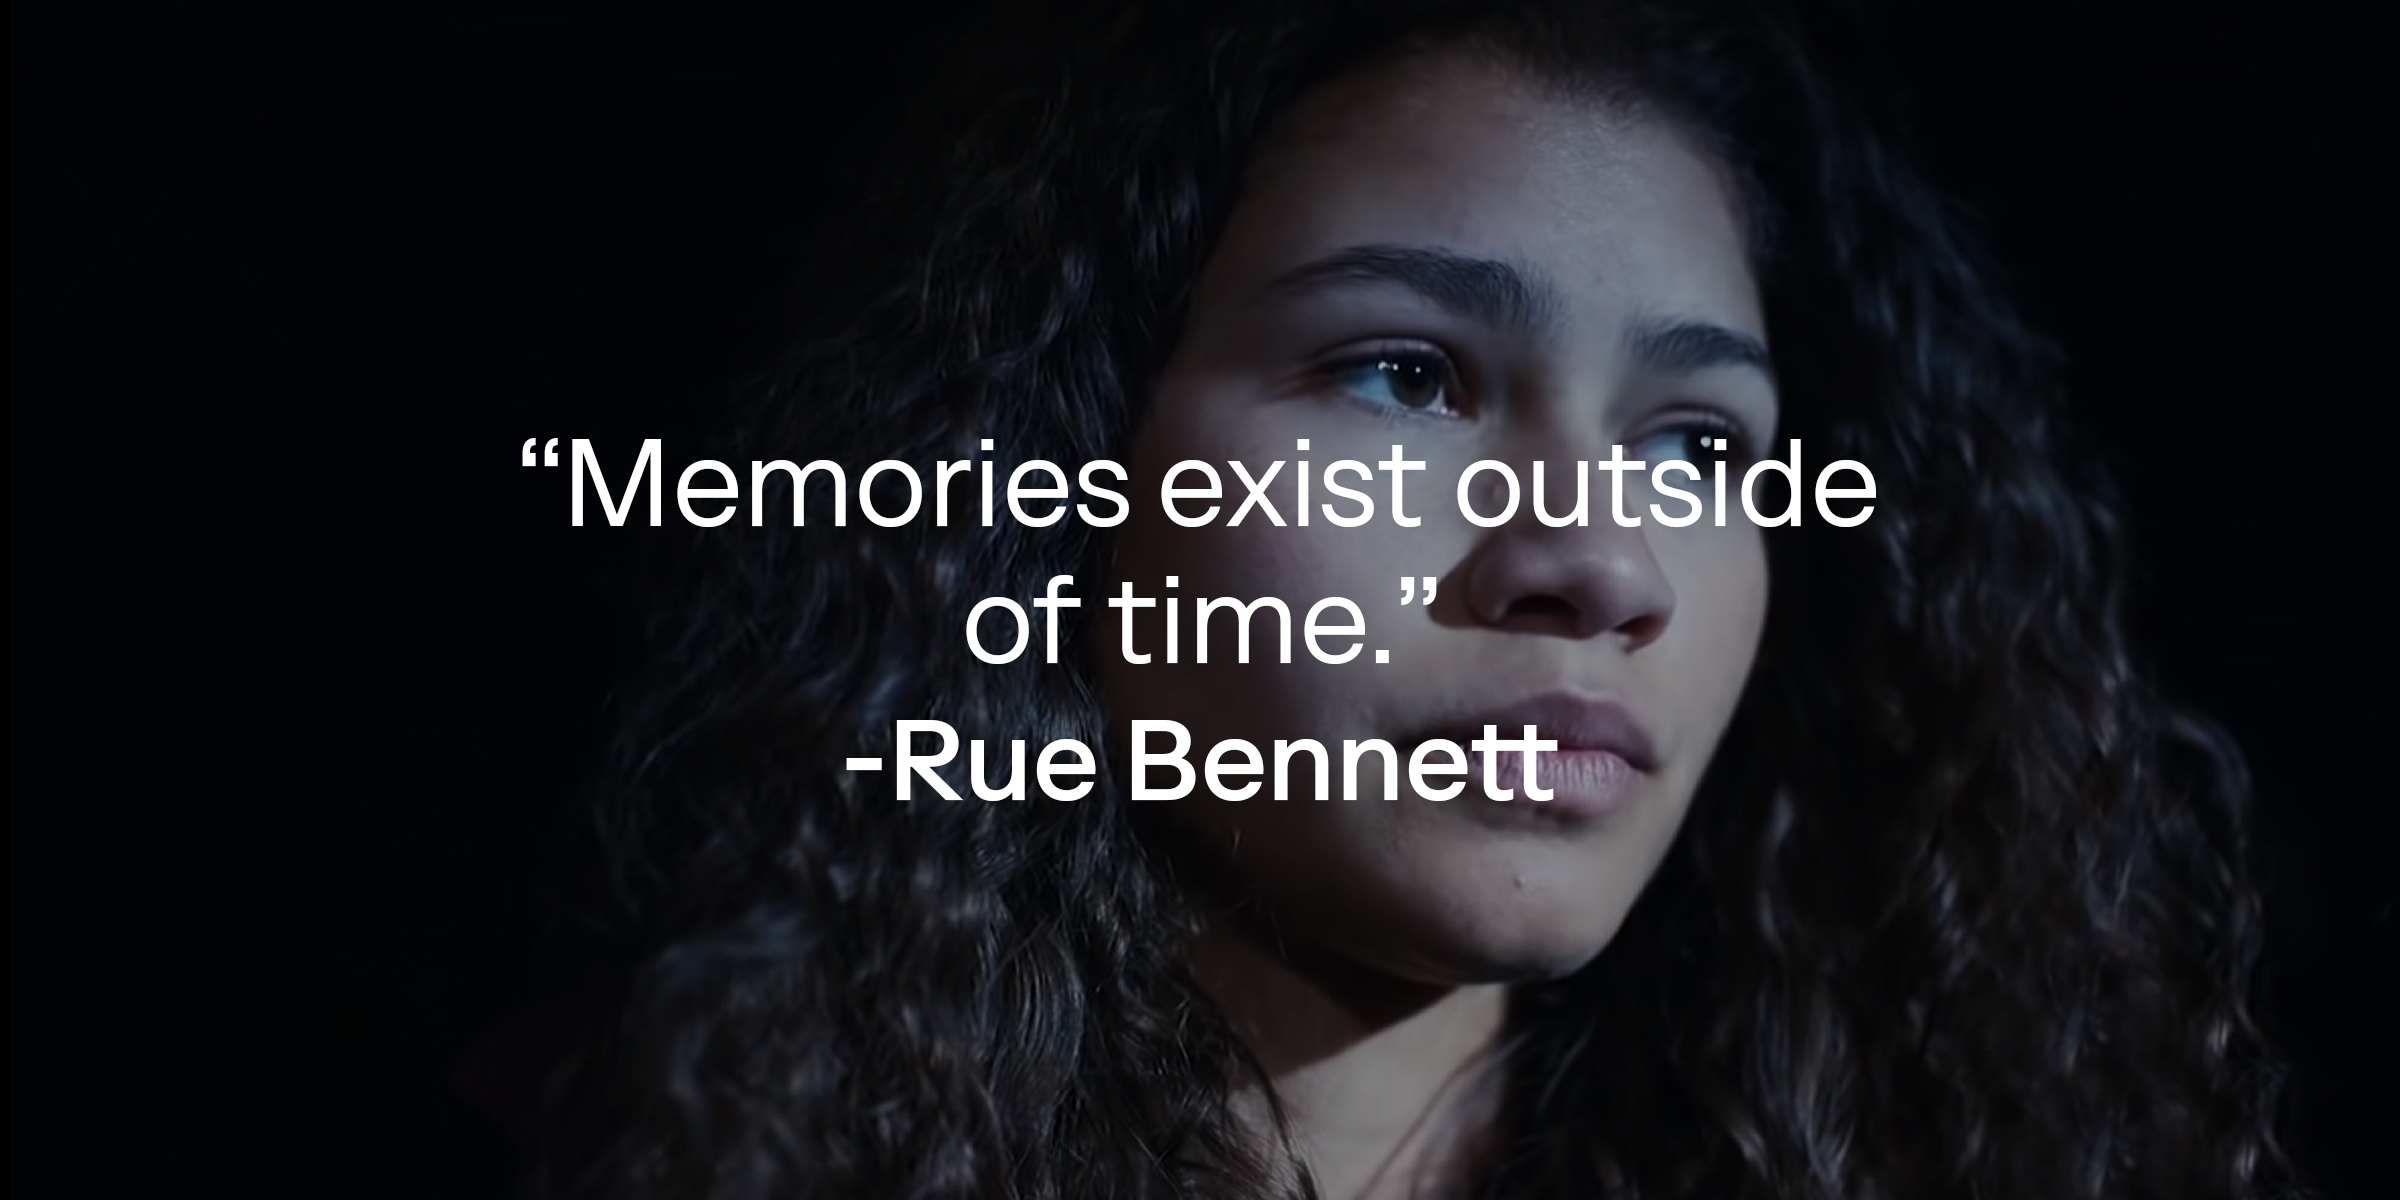 An image of Rue Bennett, with her quote: “Memories exist outside of time.” | Source: HBO